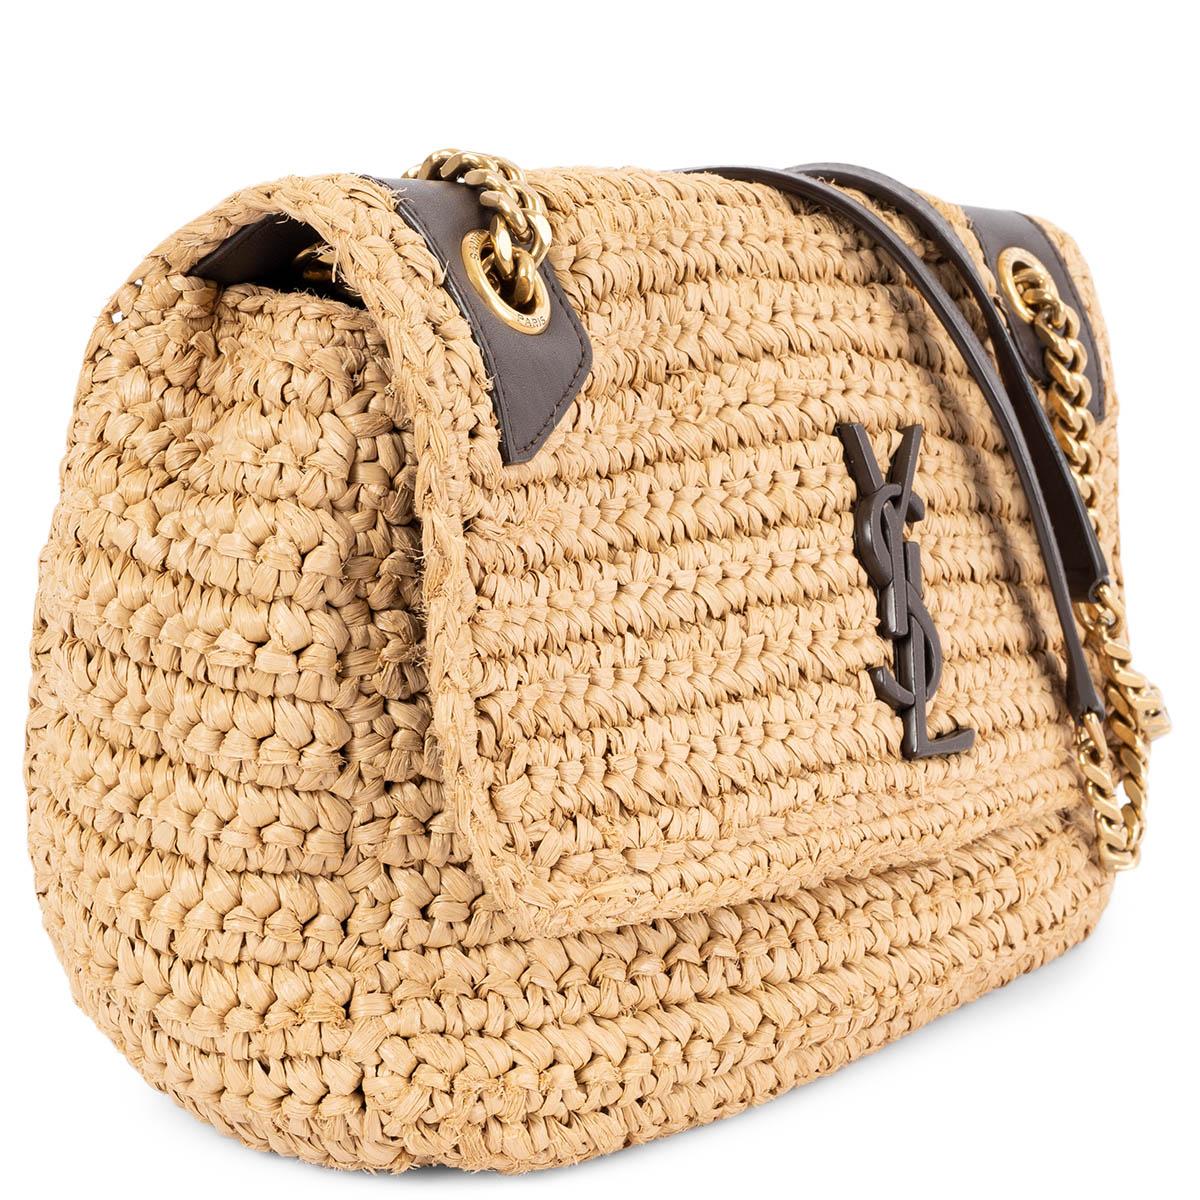 100% authentic Saint Laurent Medium Niki shoulder bag in beige woven raffia with espresso brown leather trim and YSL logo on the flap. Opens with a magnetic button under the flap to a black grosgrain lined interior with one zipper pocket against the